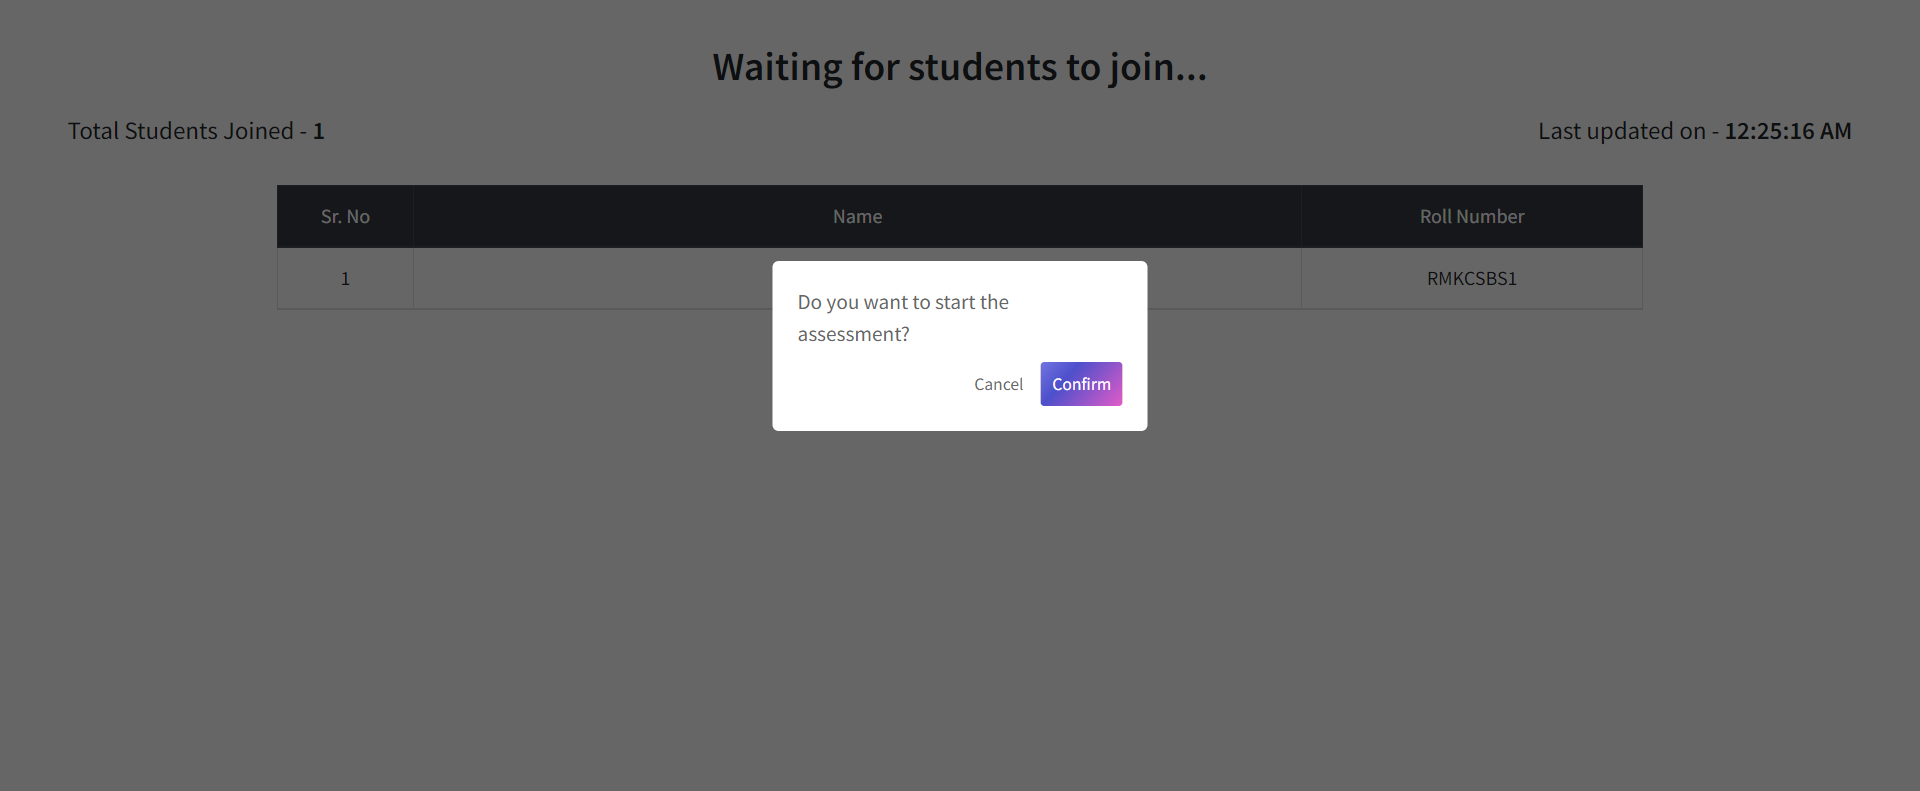 20. Select the start live assessment button and confirm to send the questions to the students.